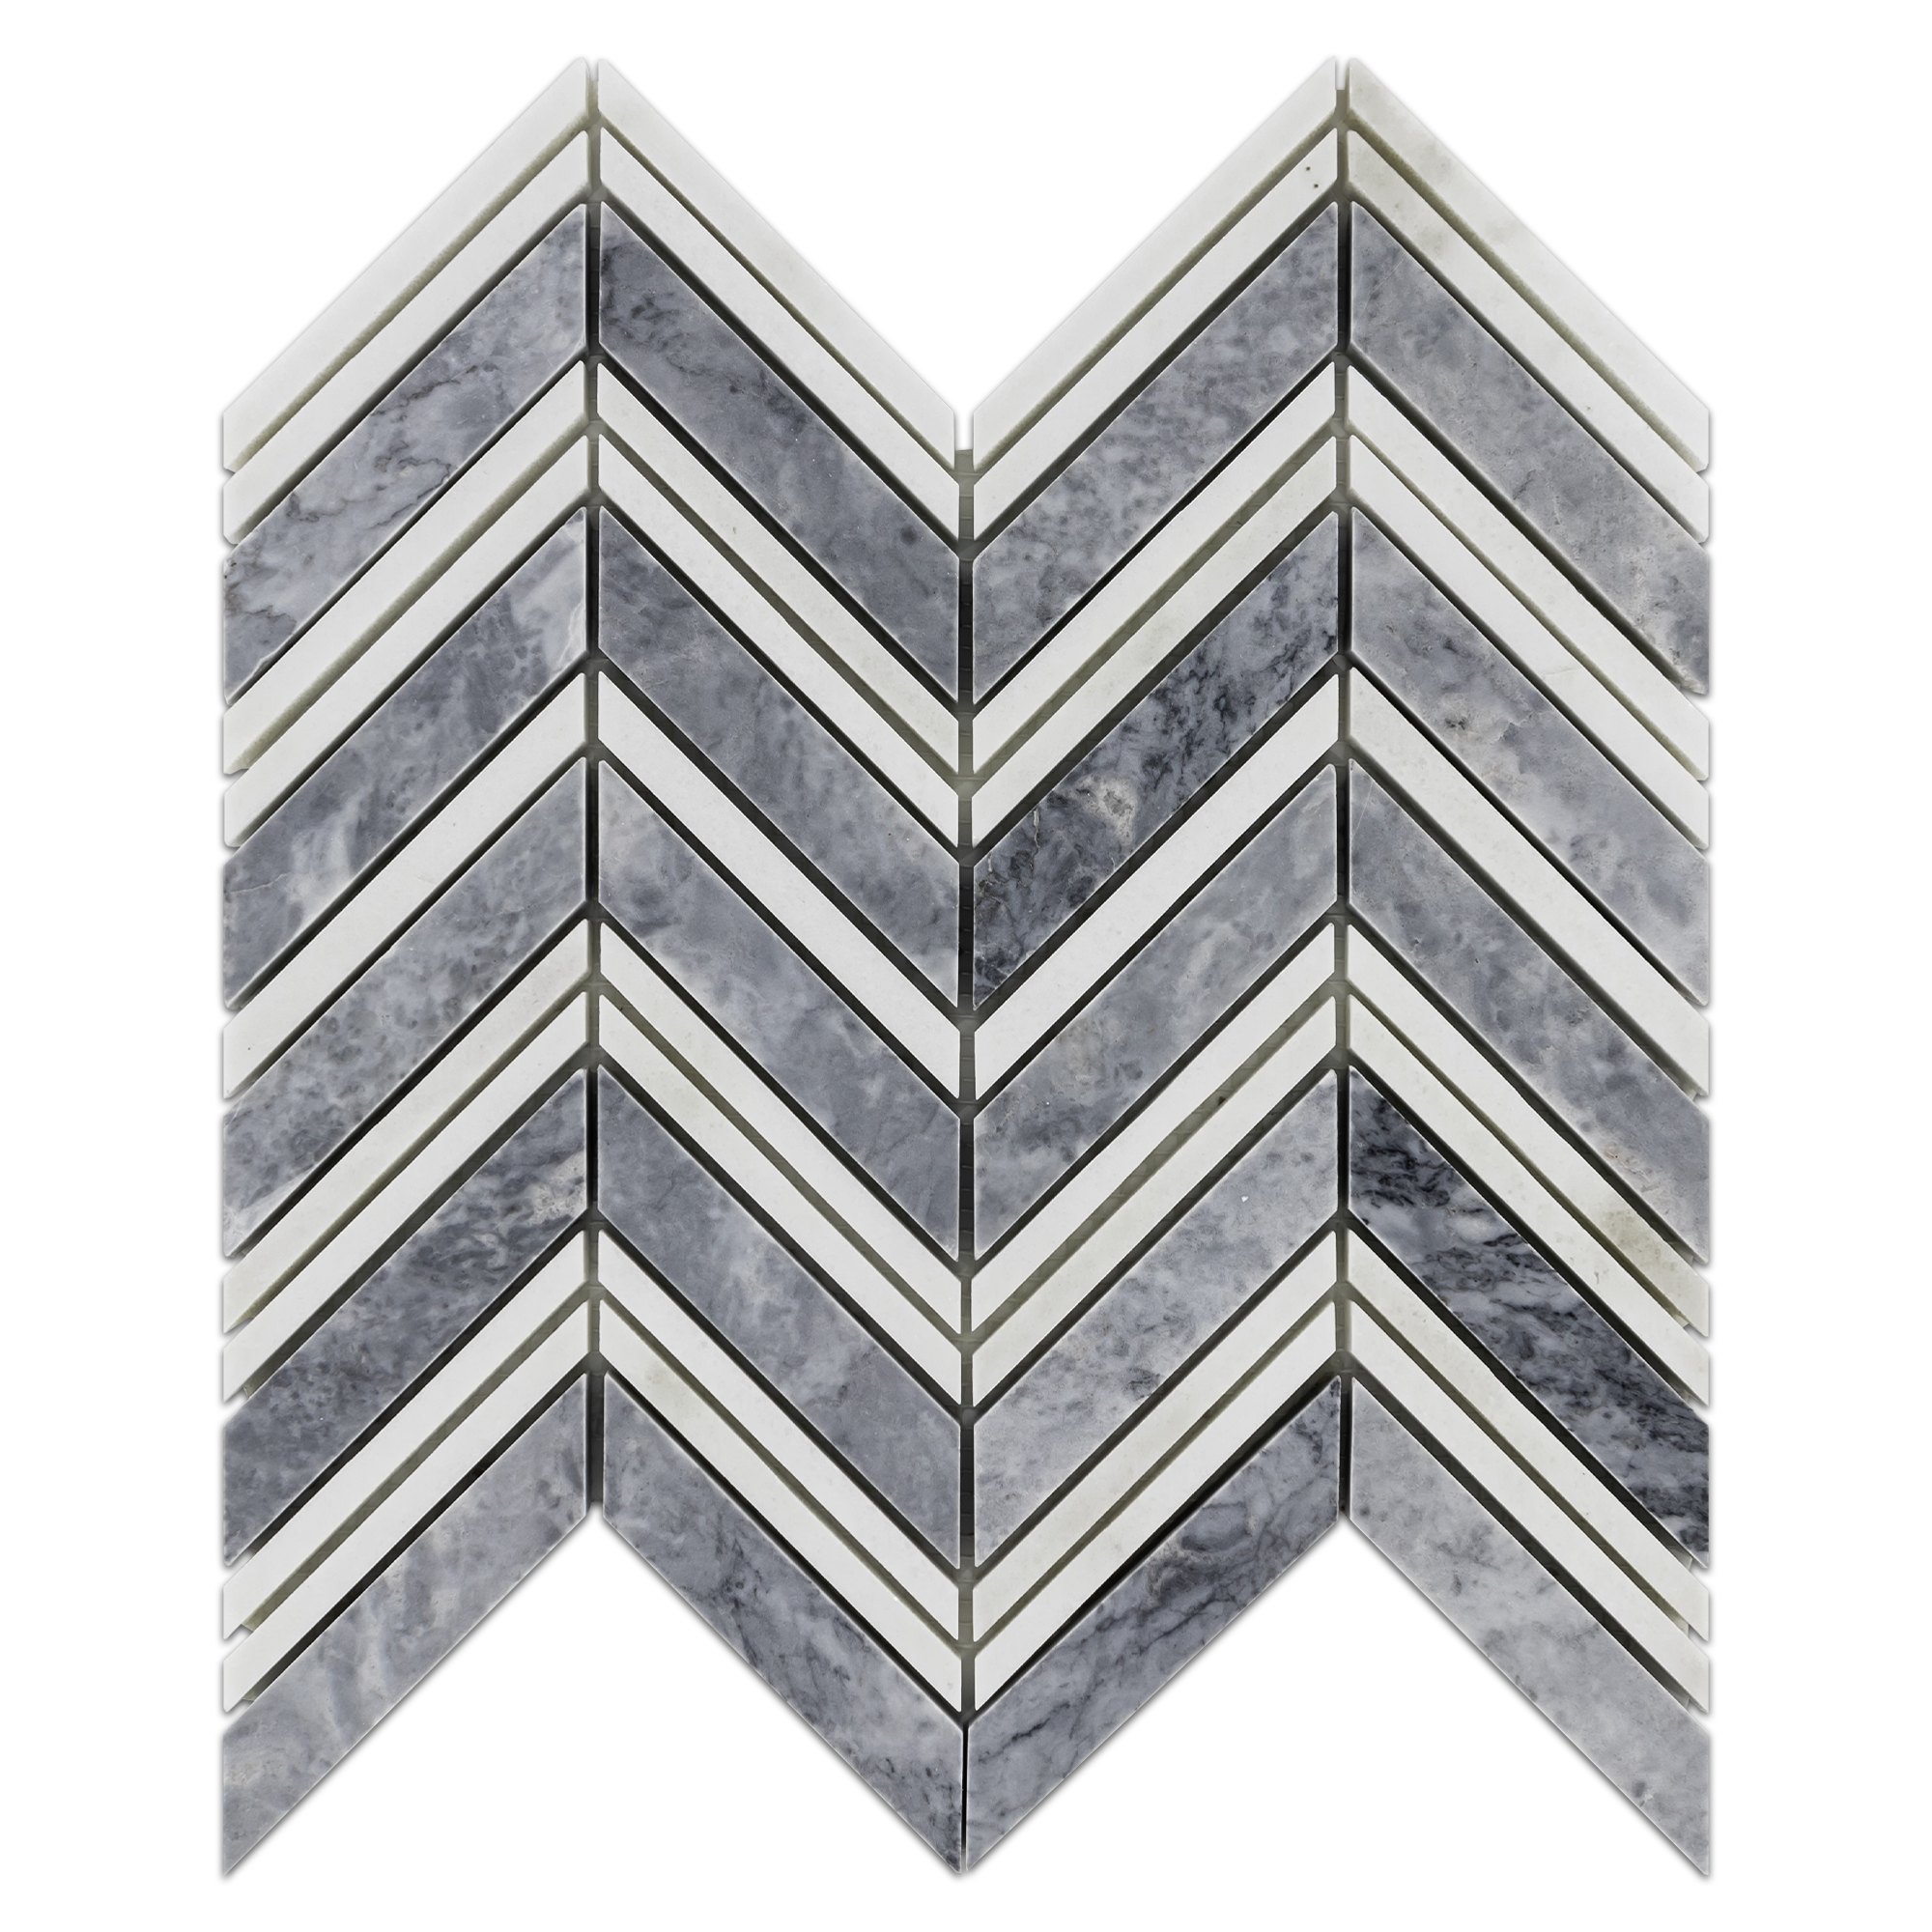 Elon Pacific Gray White Thassos Marble Bordered Chevron Field Mosaic 11x11.375x0.375 Polished - Surface Group International Product